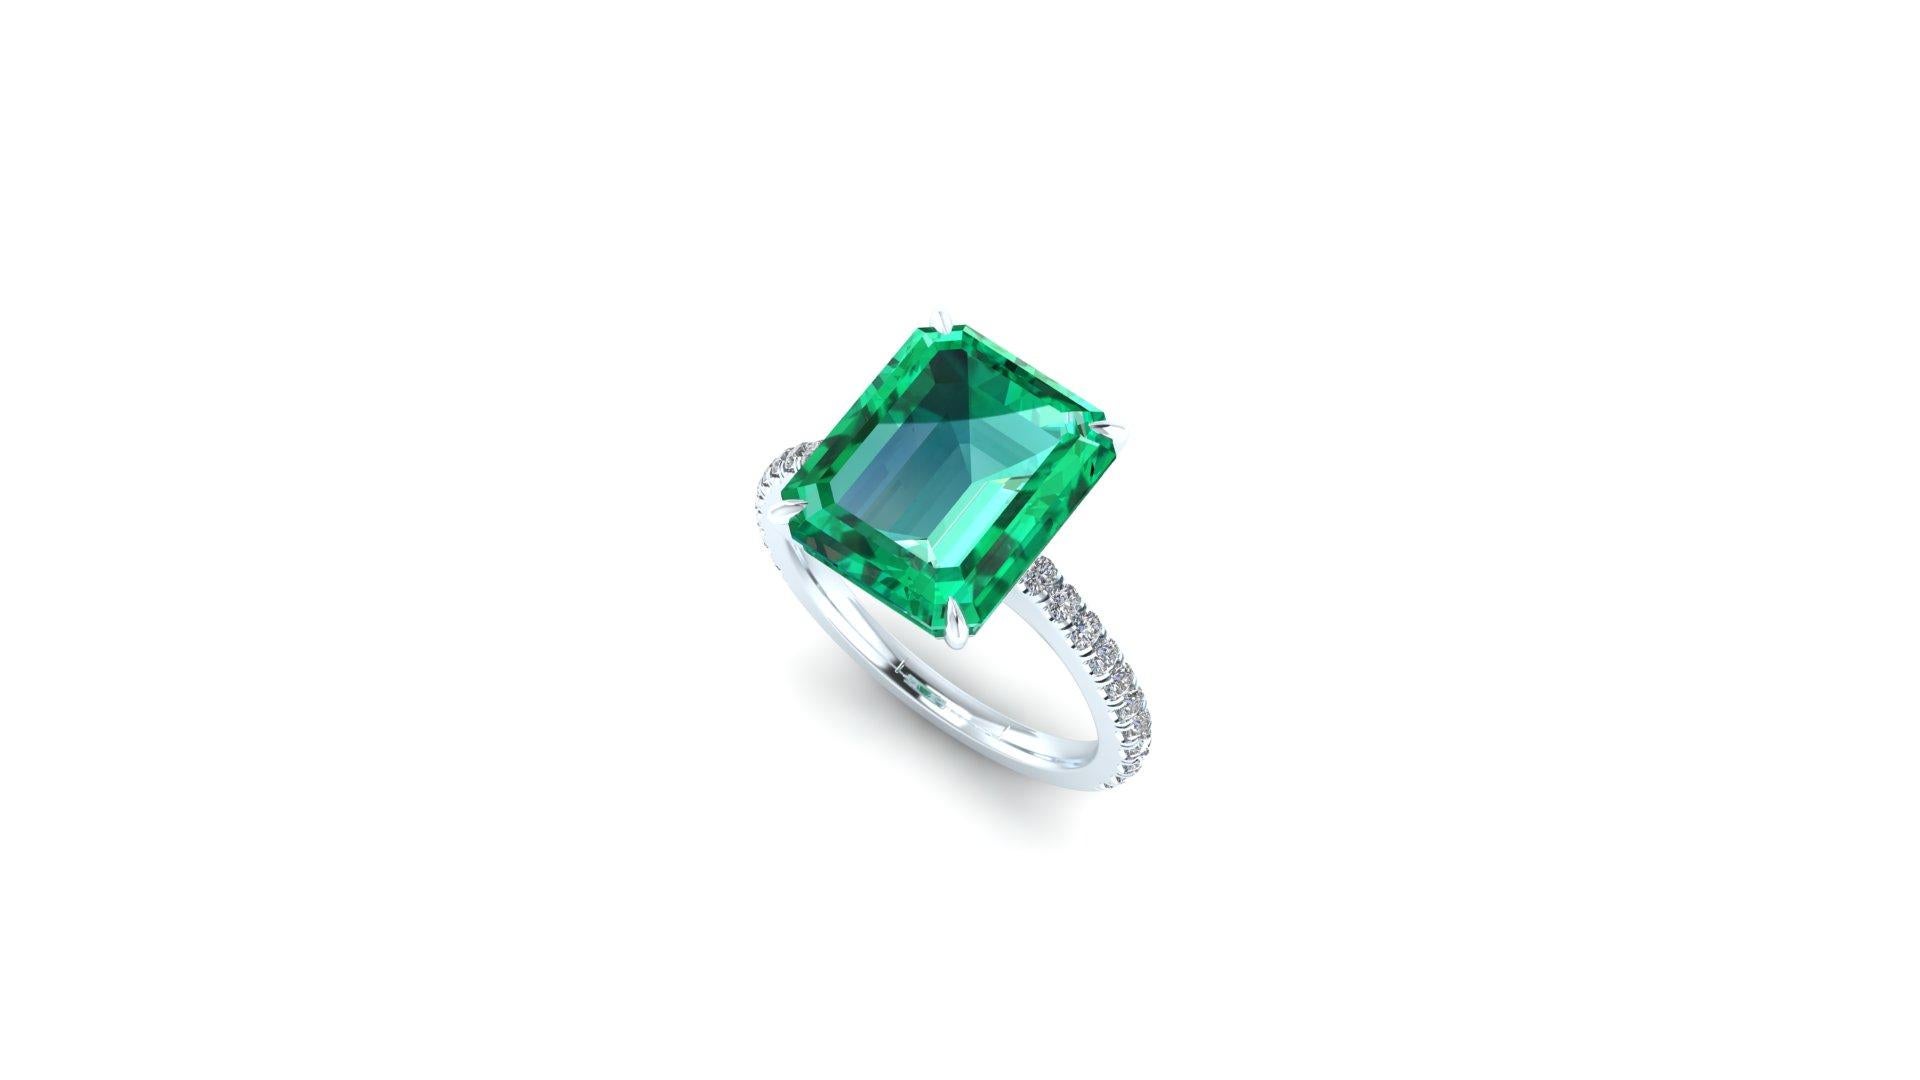 5.75 ct Emerald, GIA Certified stunning clean mineral, with only a few natural inclusions typical of the Emerald. 
Pave' diamonds set with microscope for high end detailing, for an approximate carat weight of 0.30 carats, G color, Vs clarity.
Made